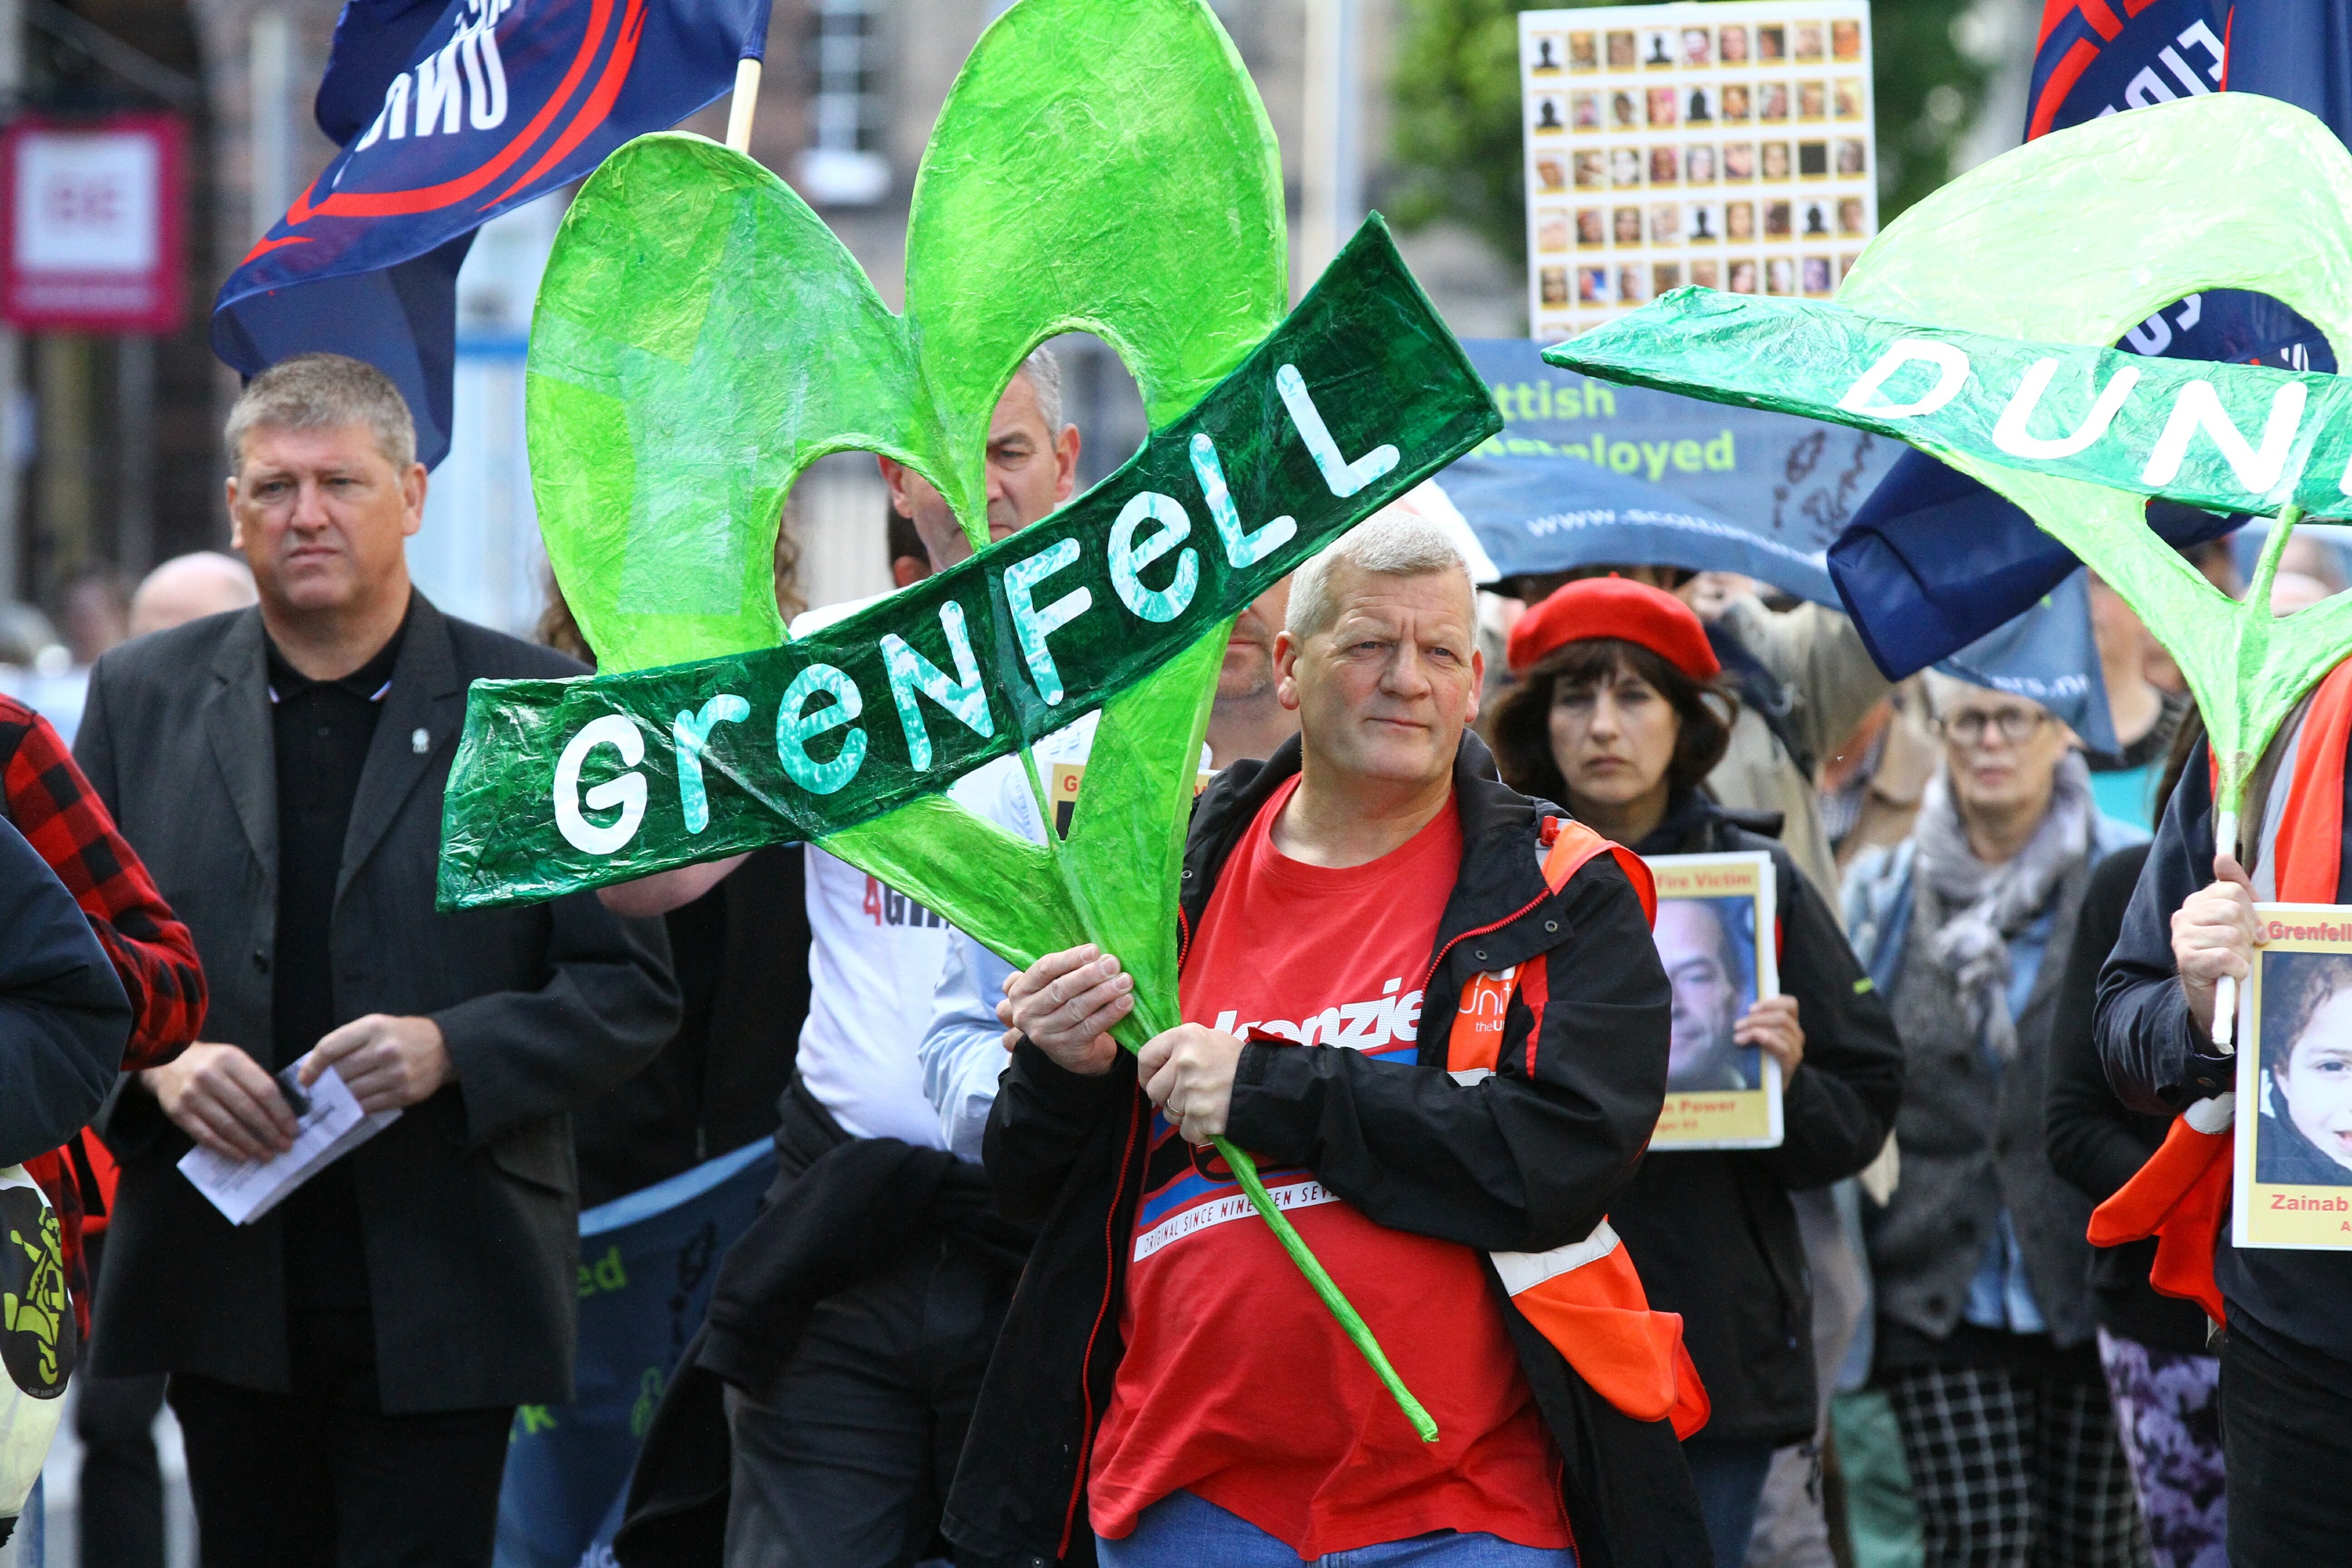 Dundonians take part in a silent march in memory of Grenfell tower victims